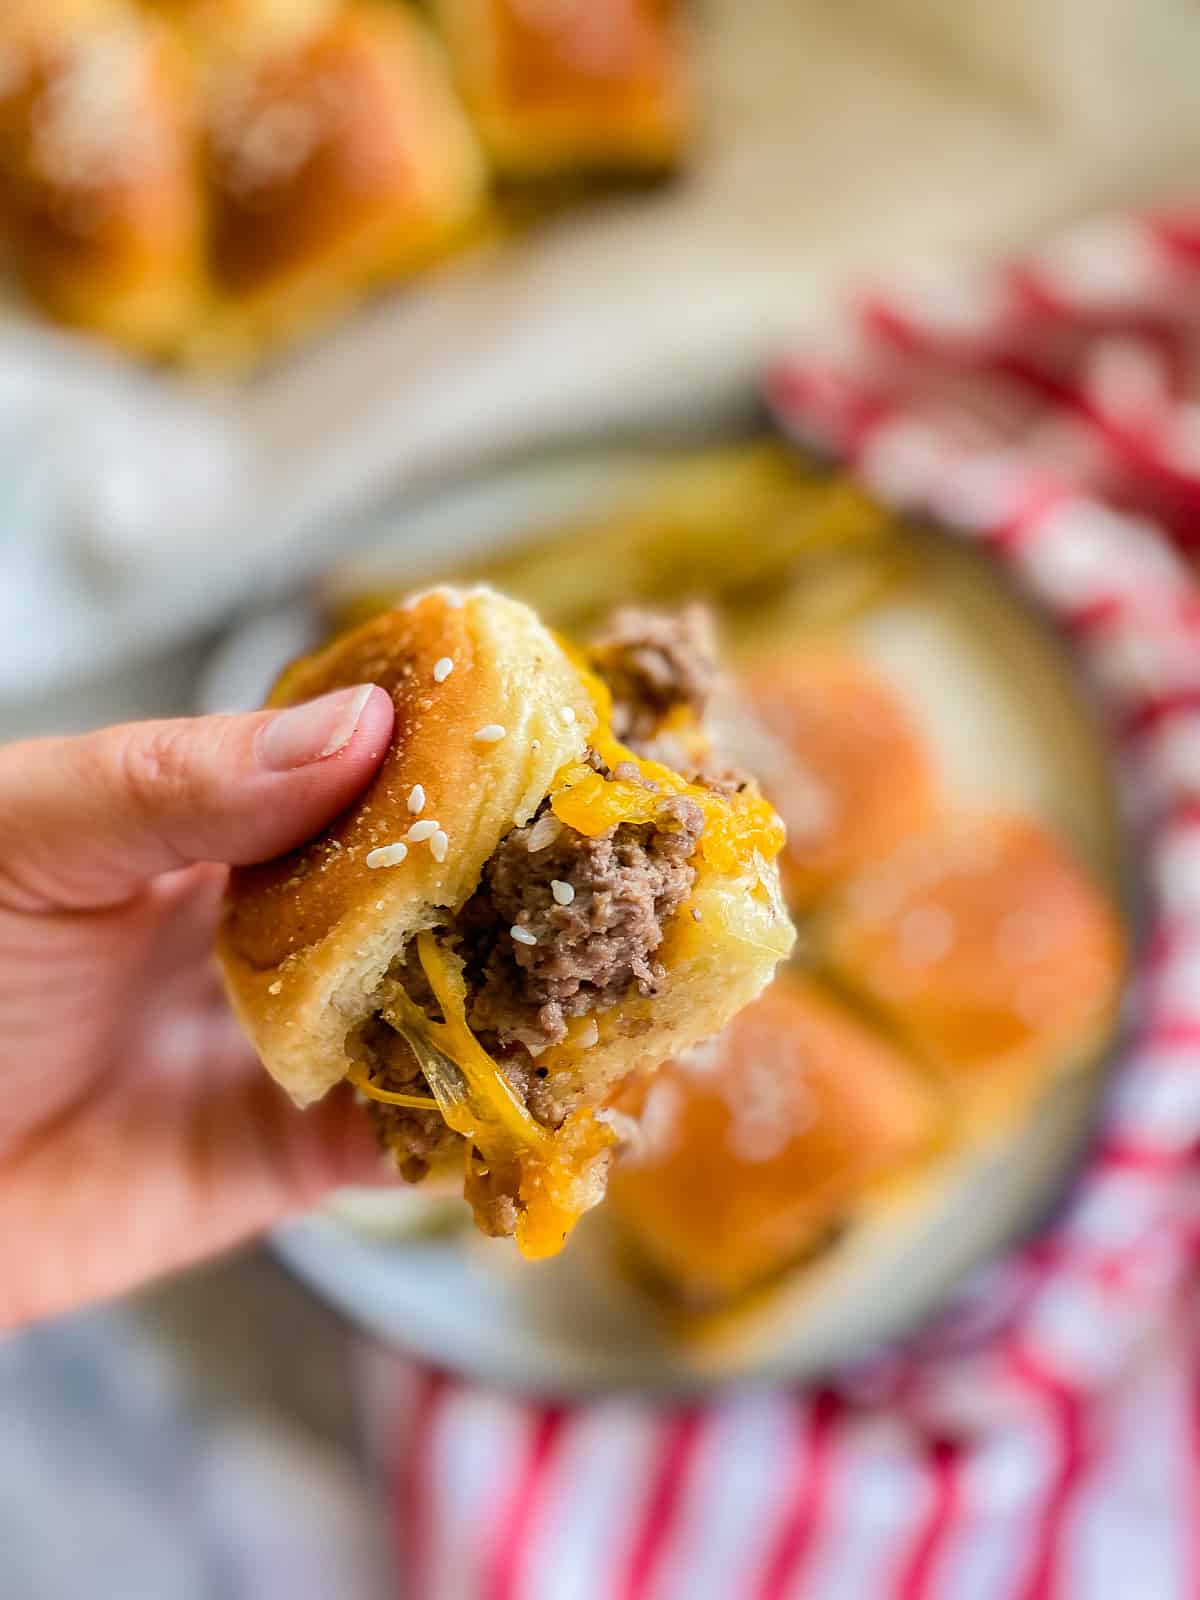 Hand holding a ground beef slider with cheese over a plate of sliders.